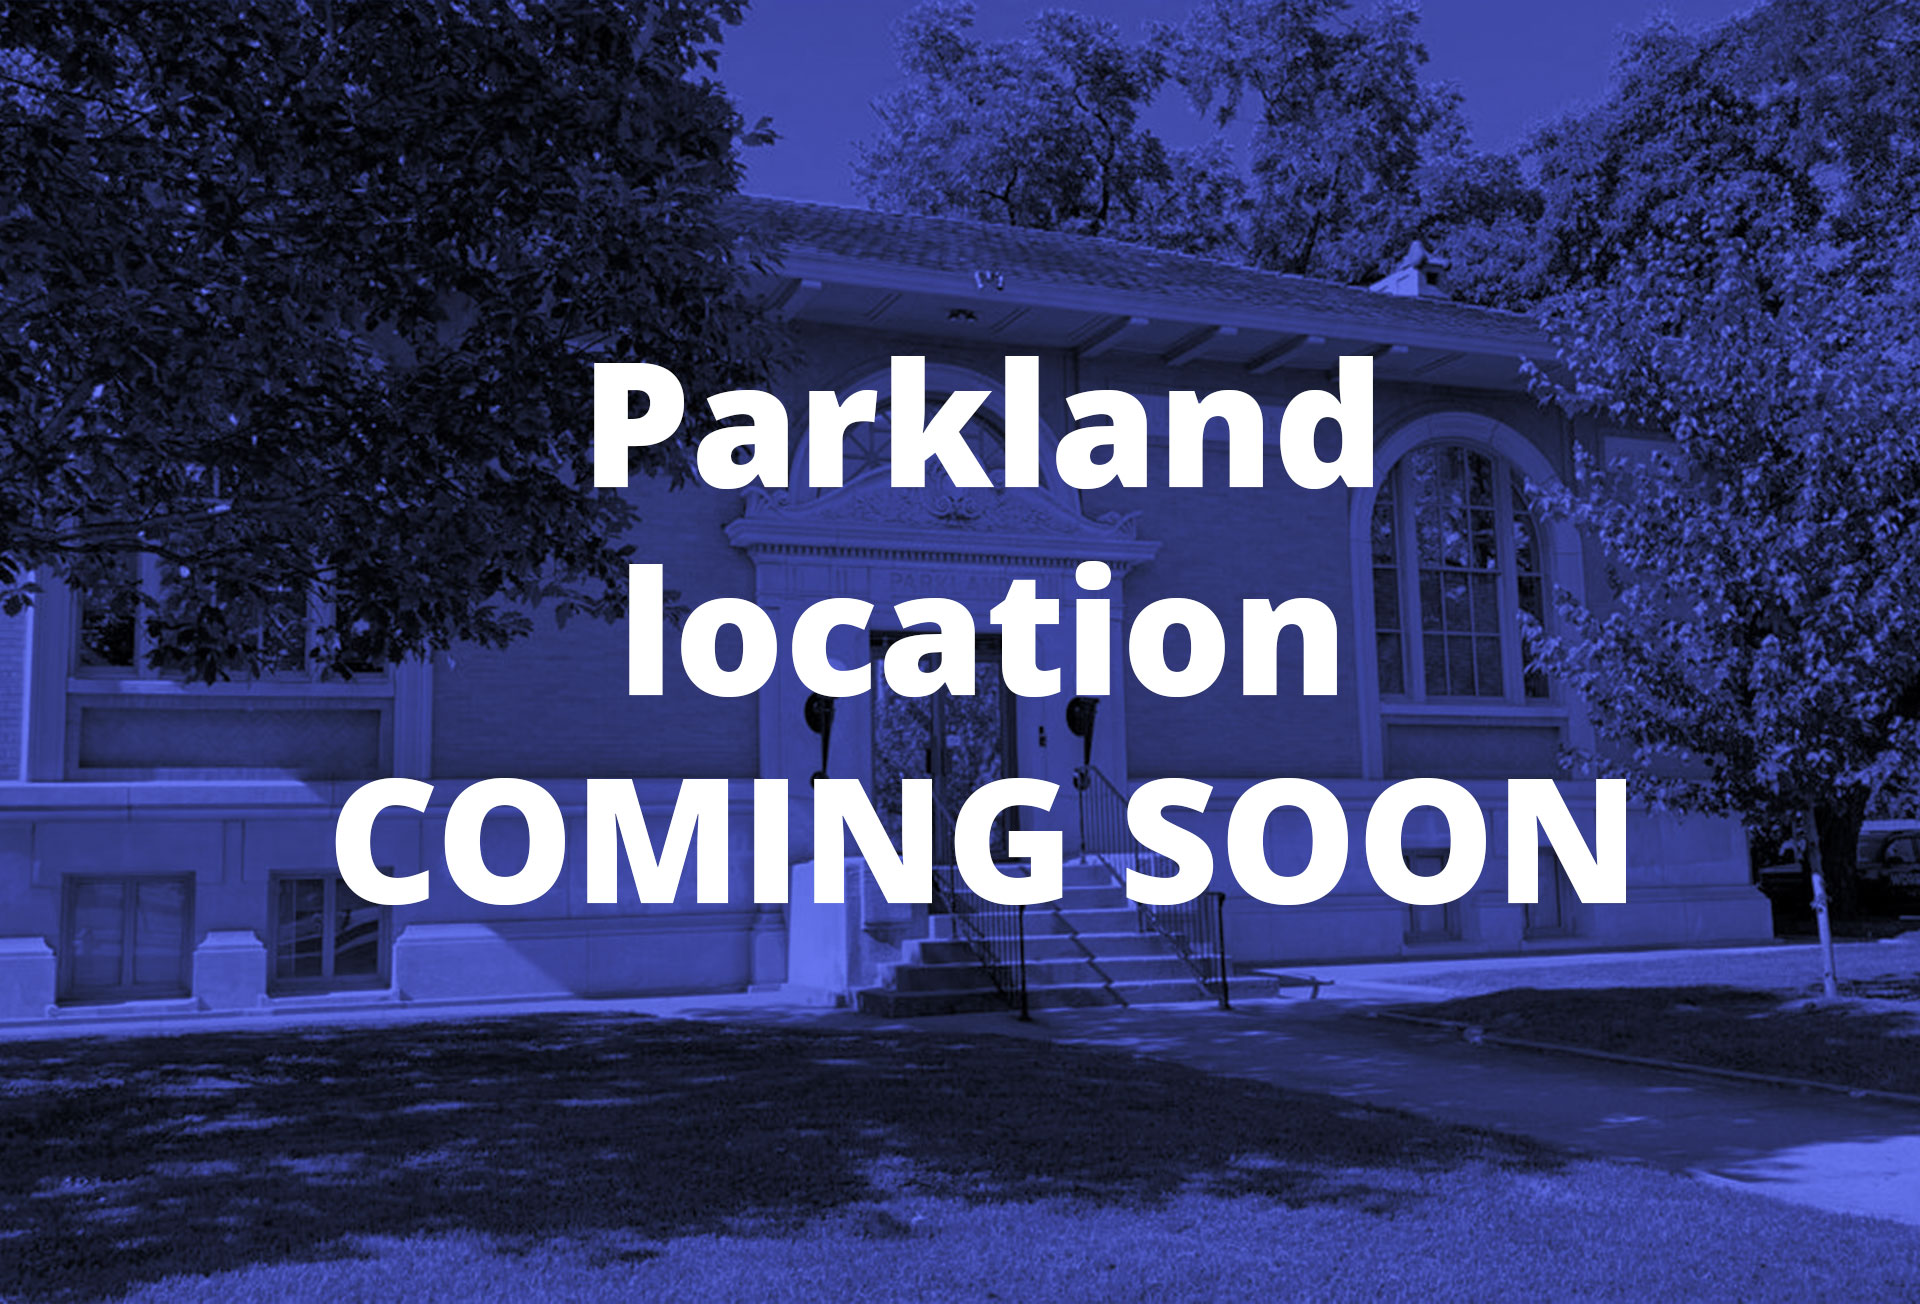 Parkland location coming soon